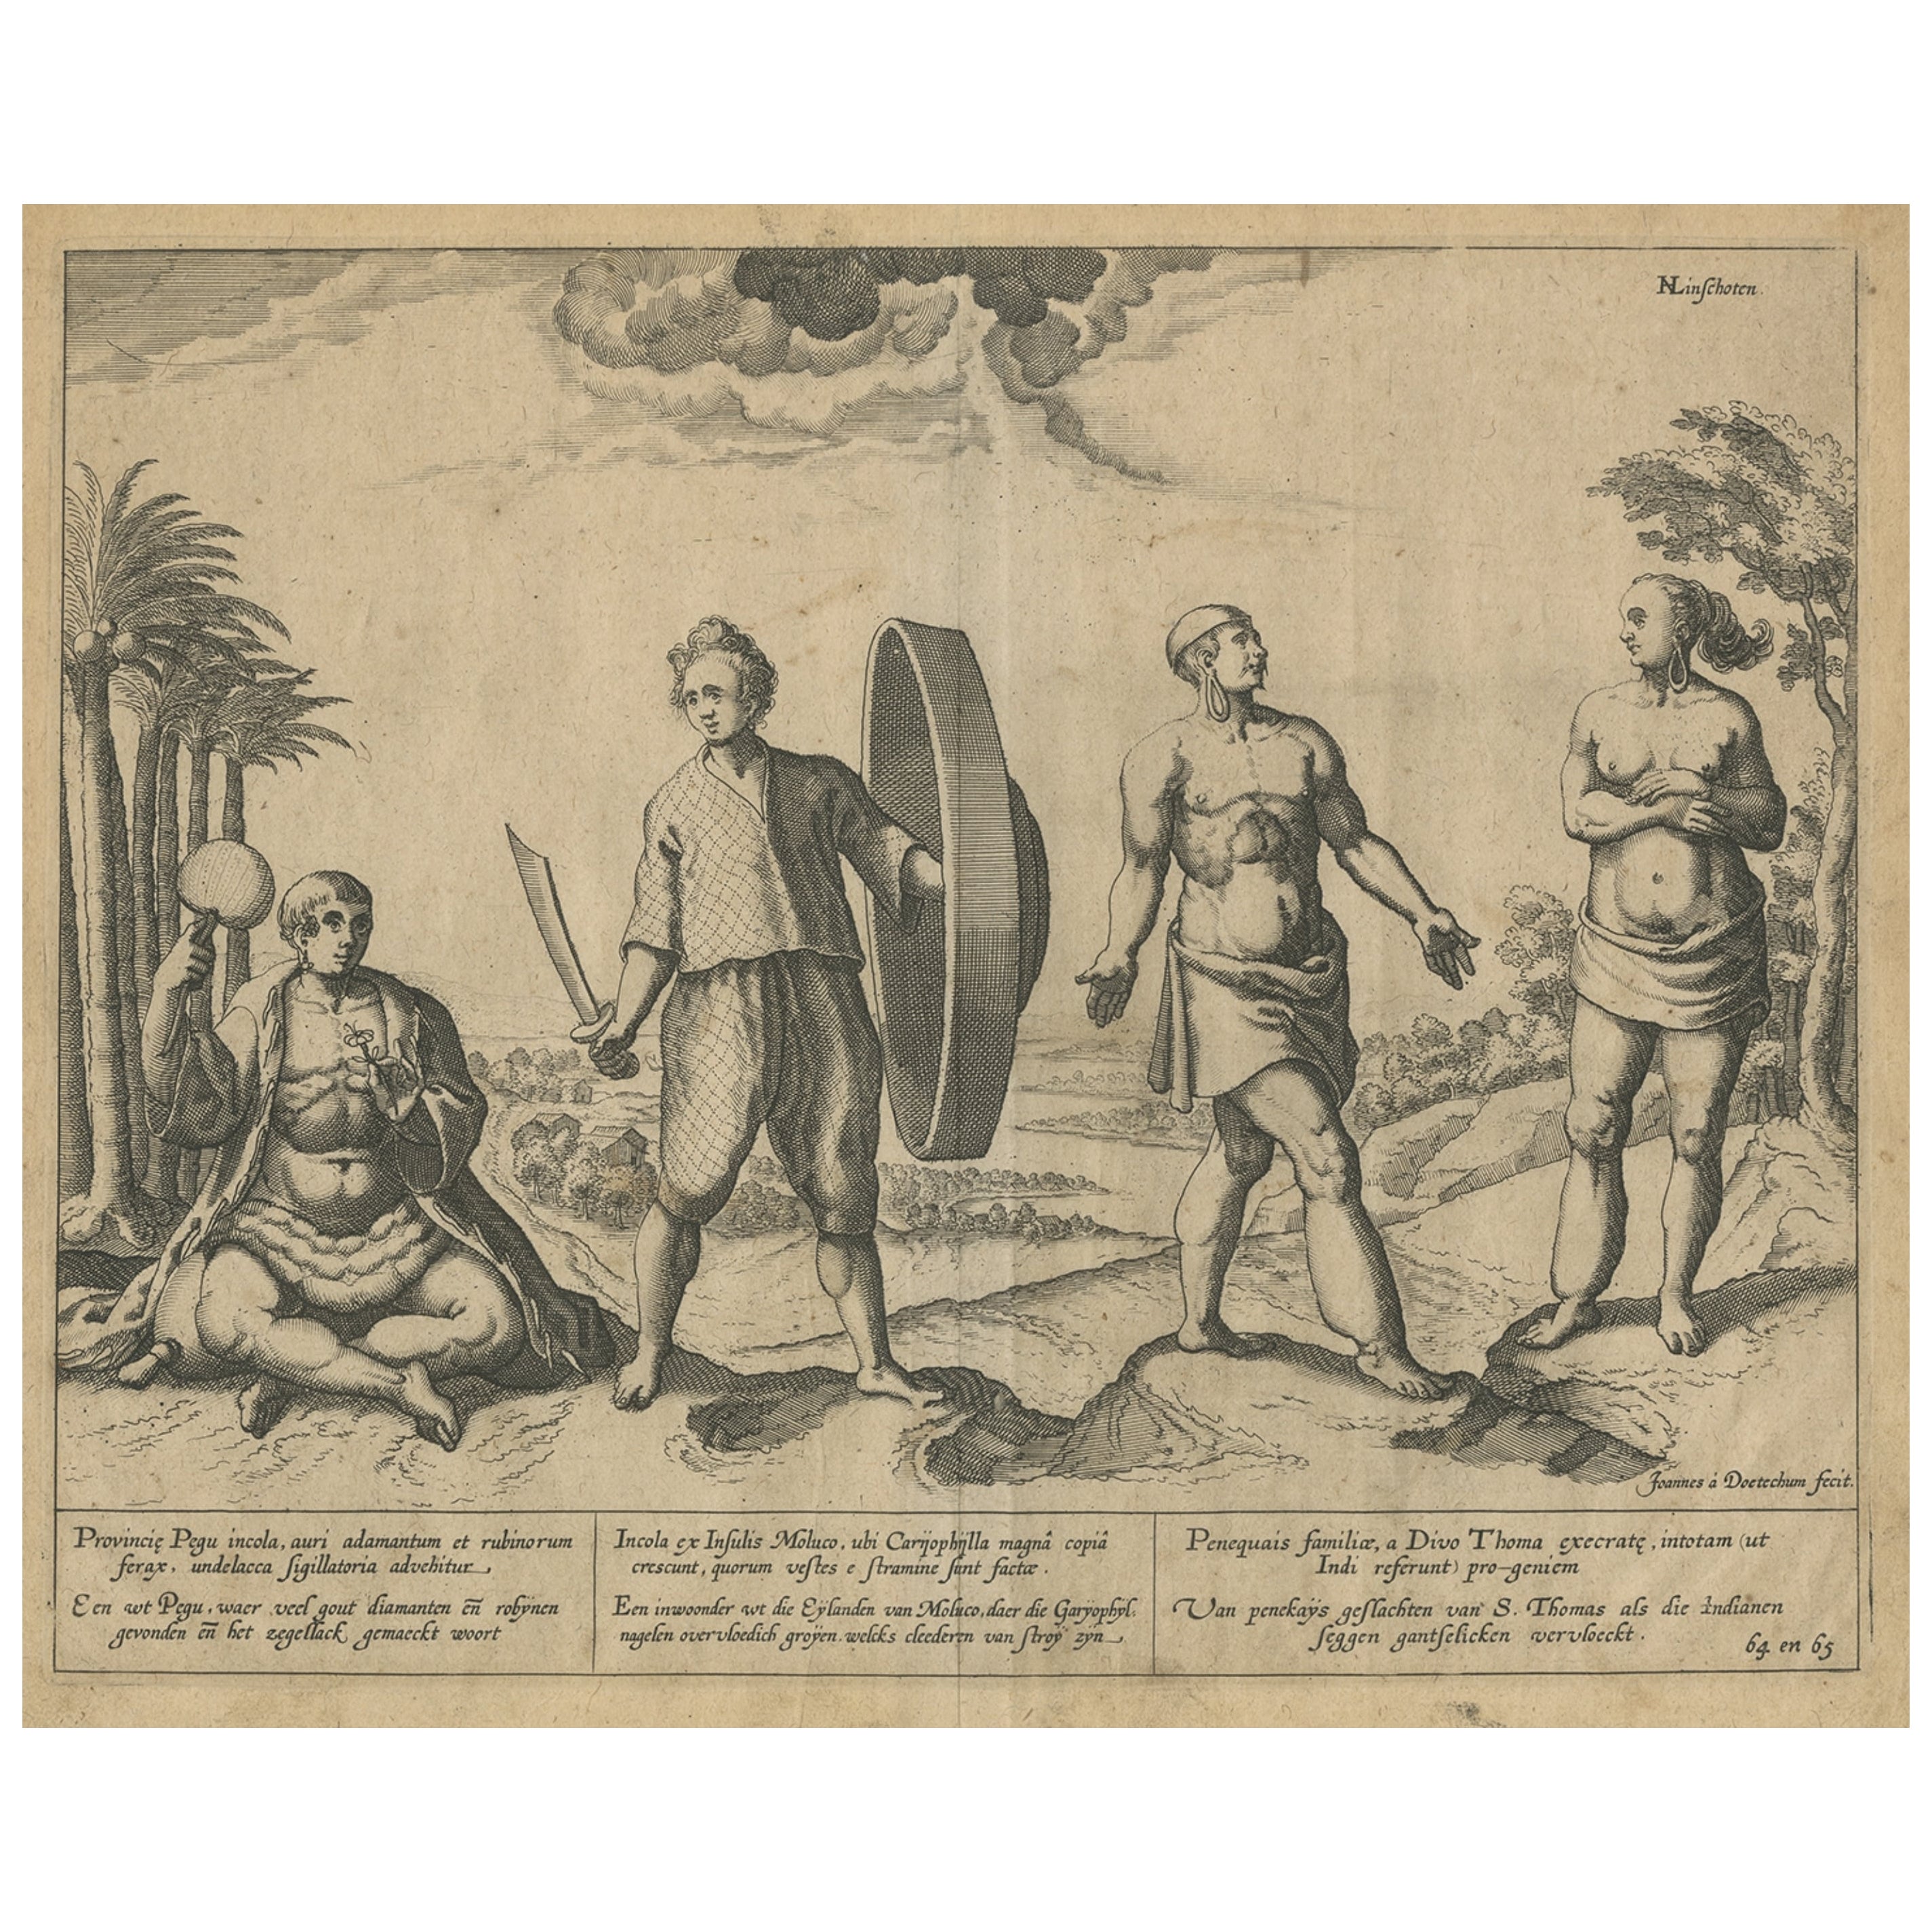 Natives from Pegu, the Moluccan Islands, Penequais Indians and St Thomas, c.1605